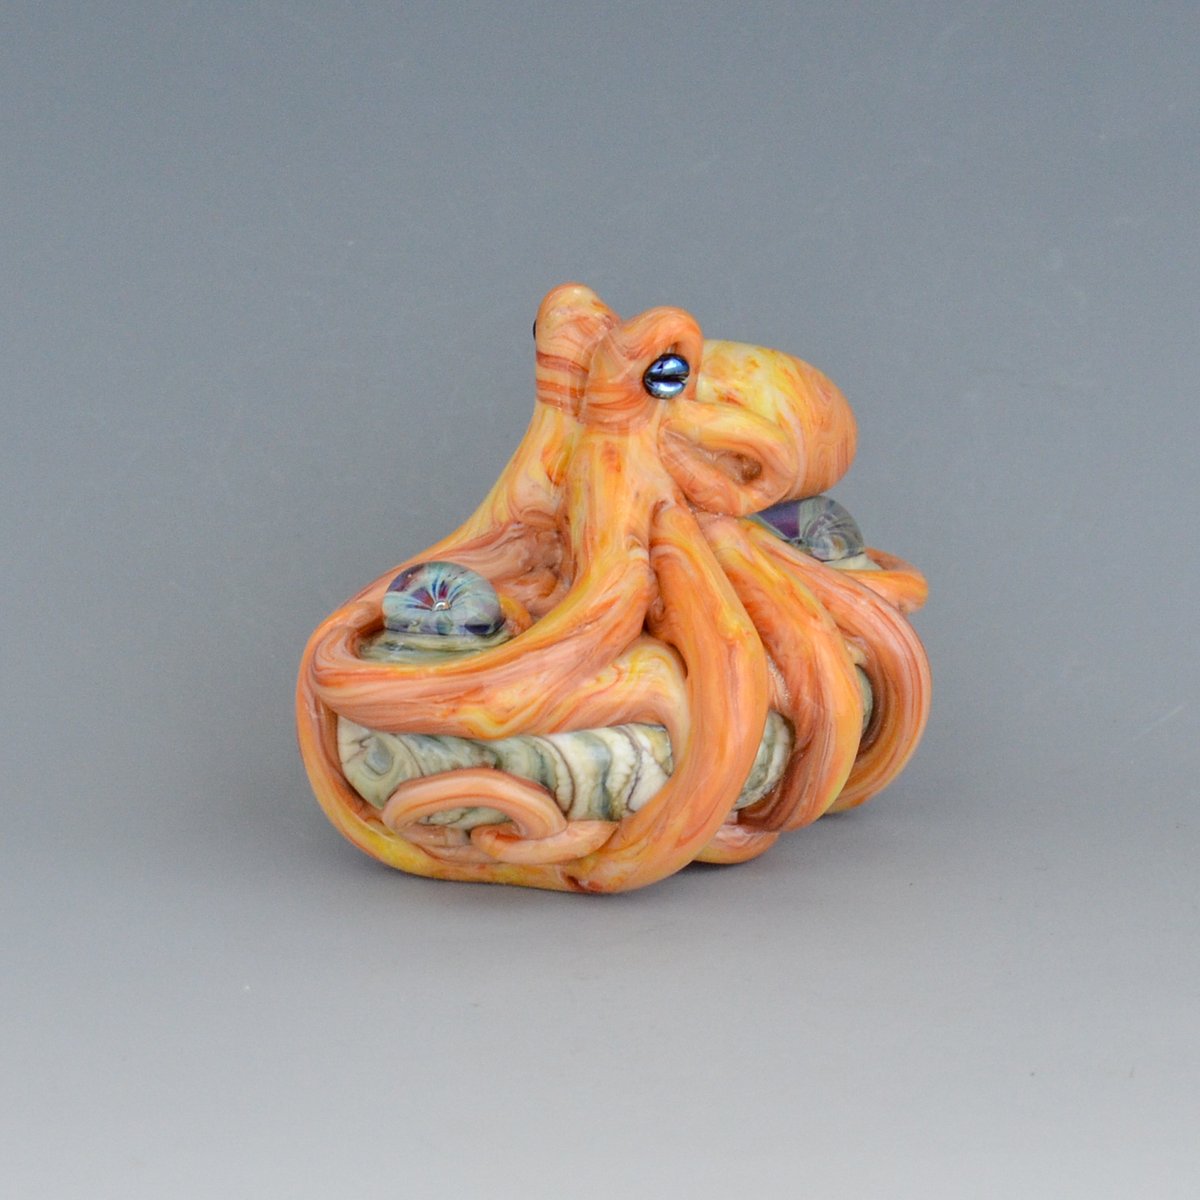 Image of LG. Streaky Little Pale Coral Orange Octopus - Flameworked Glass Sculpture Bead